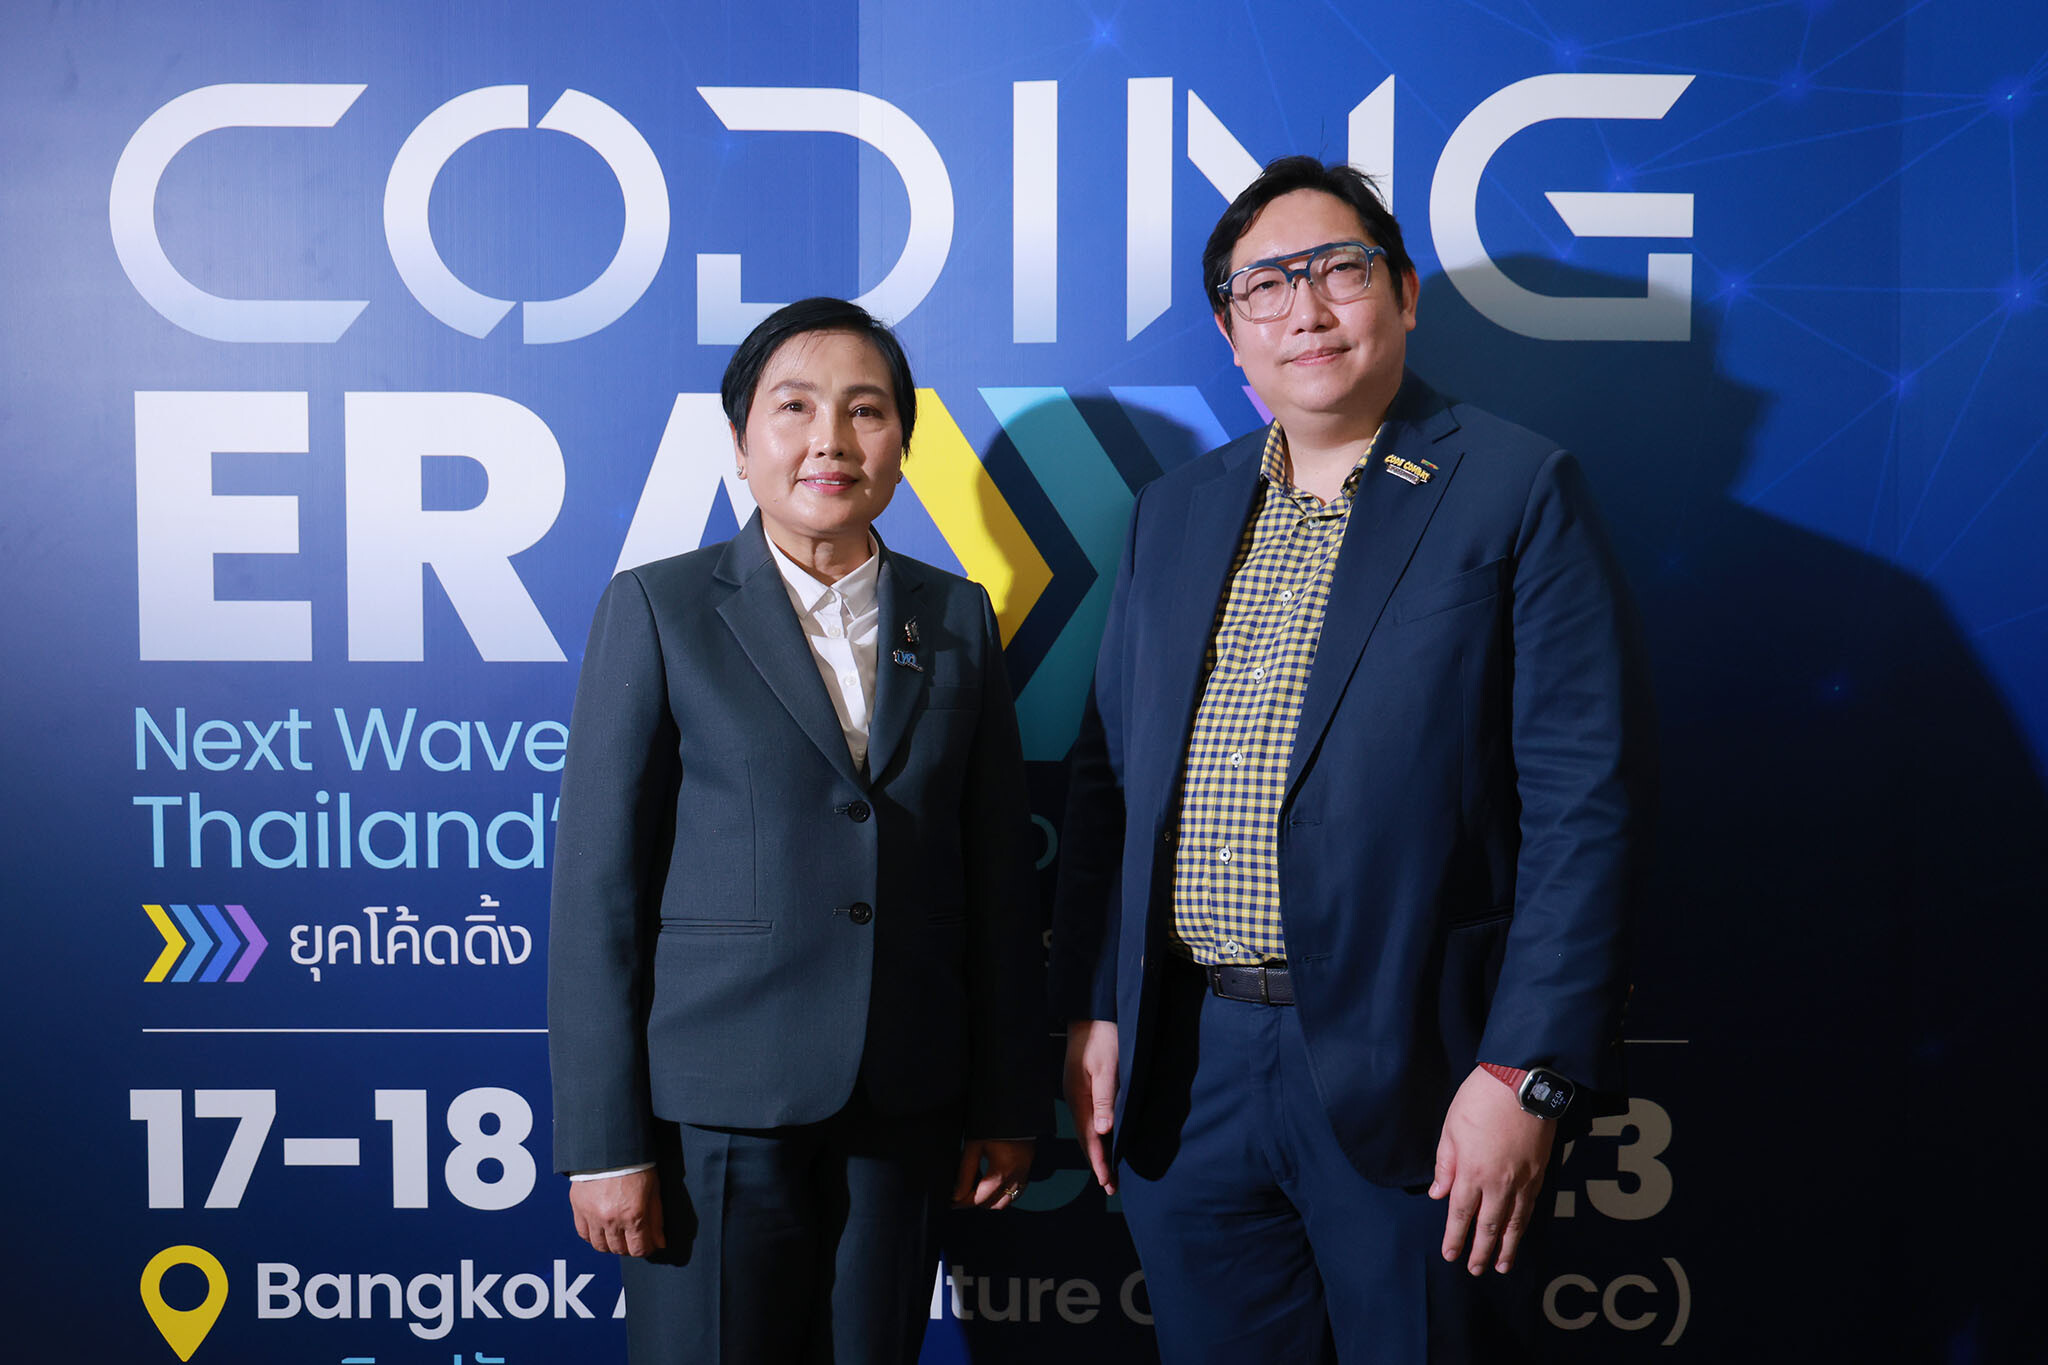 PMU-B joins with CodeCombat (SEA) to organize the "CODING ERA: Next Wave of Thailand's Education"